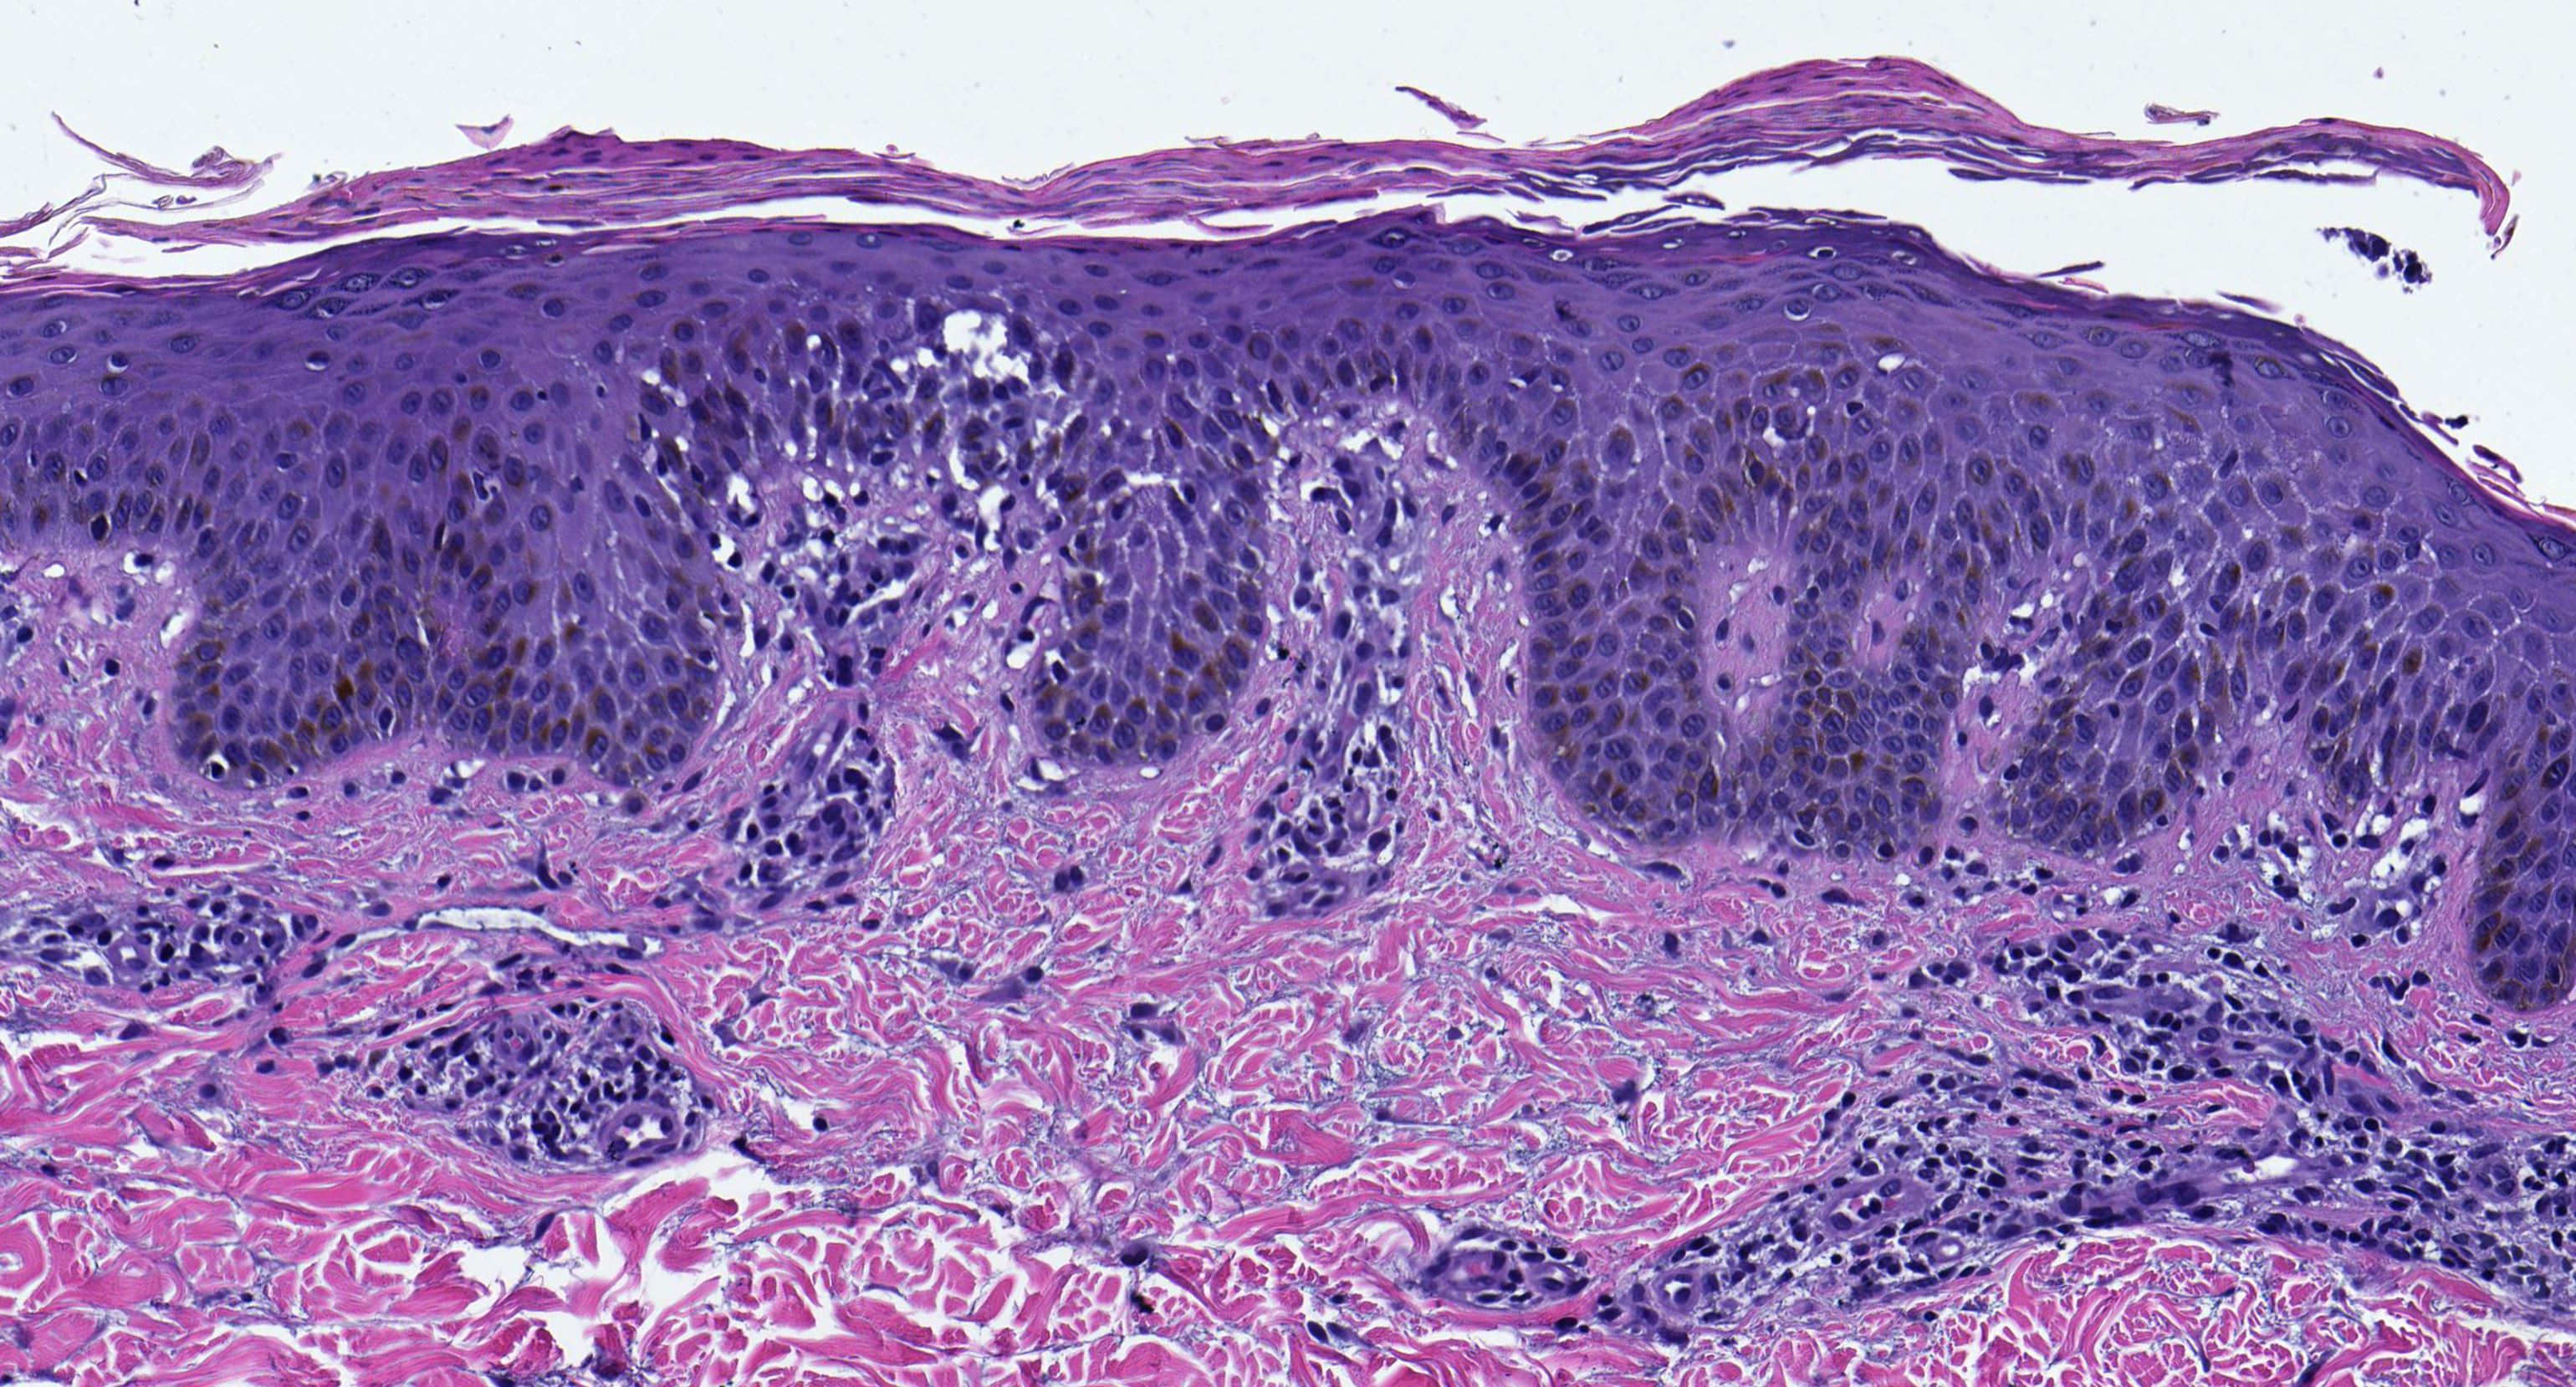 Spongiosis, parakeratosis, superficial lymphocytic infiltrate